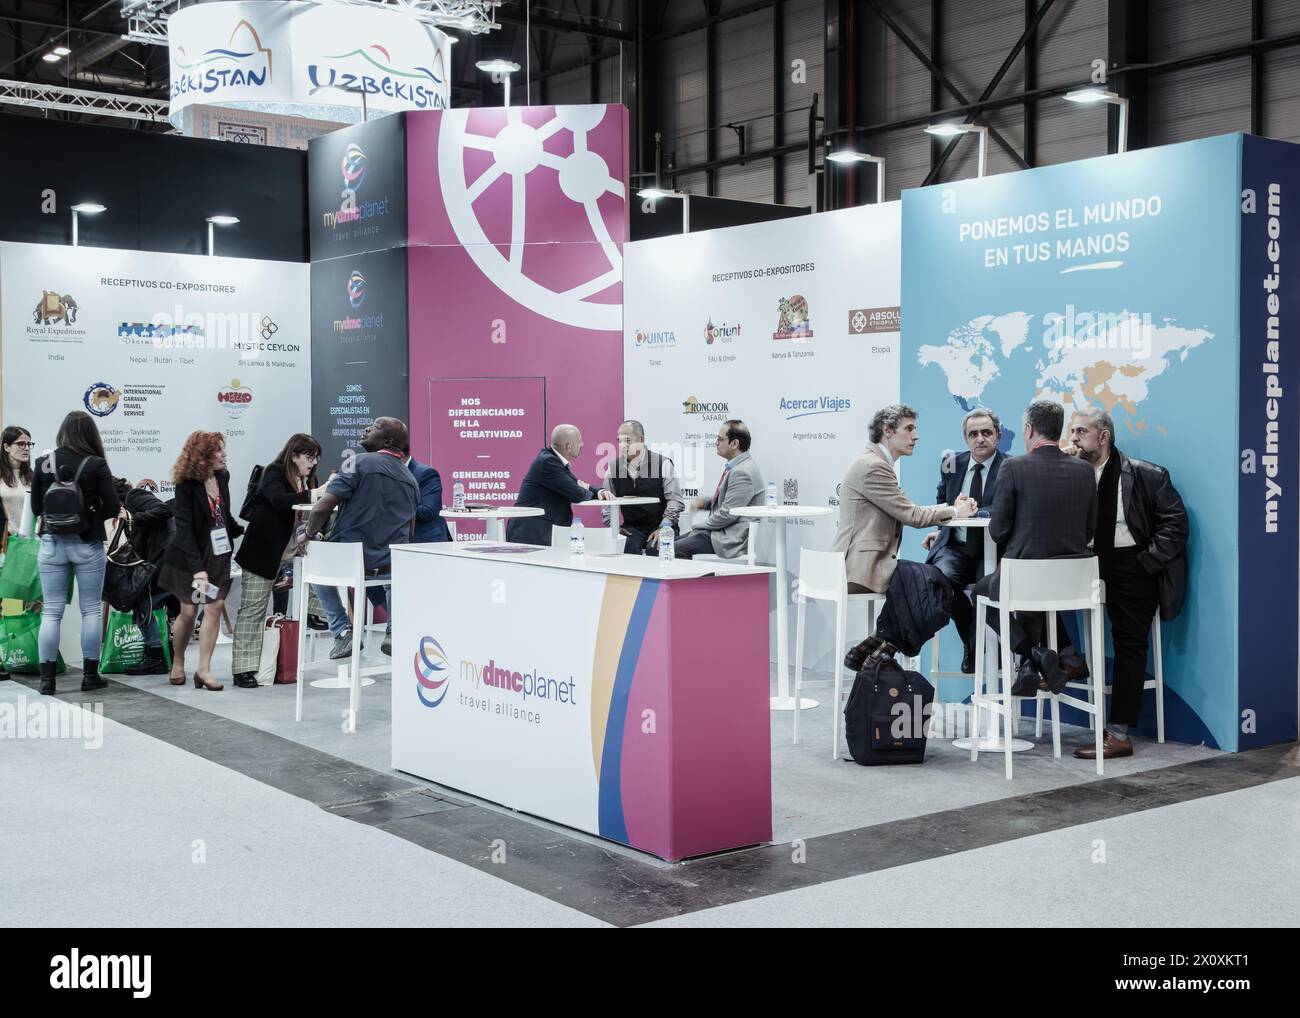 Madrid, Spain, January 25th 2024: Vibrant networking at Fitur: Tourism professionals engage amidst colorful displays Stock Photo